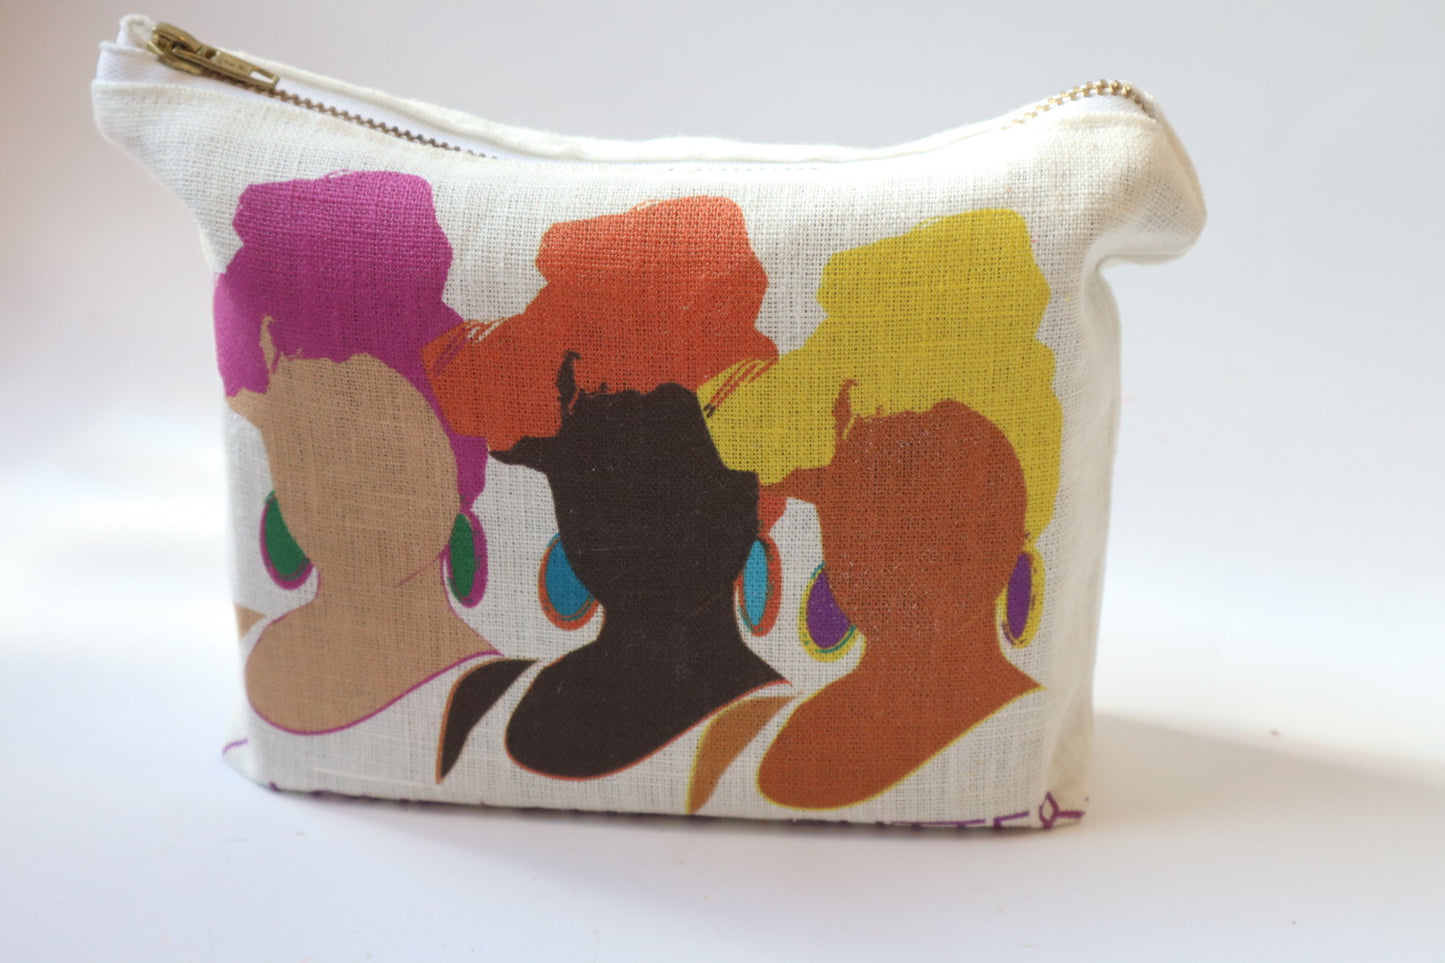 Lithuanian Linen Toiletry and Make-Up Bag